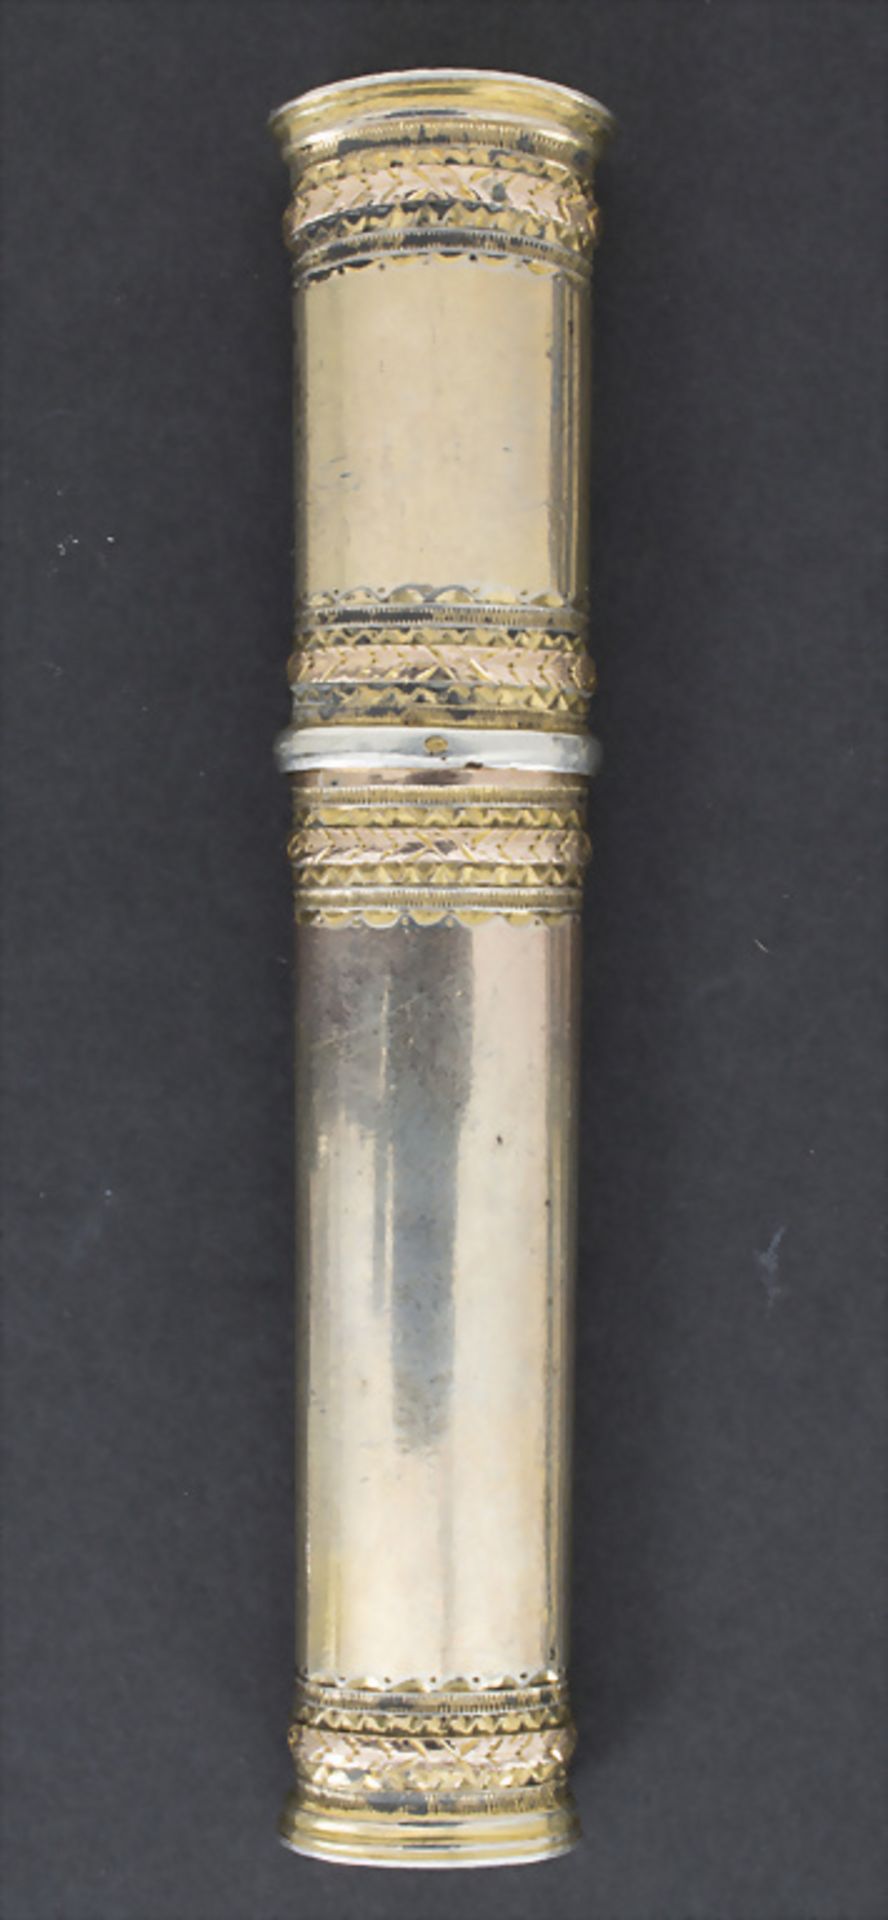 Empire Nadeletui in Silber und Gold / An Empire silver and gold needle case, Frankreich, um 1800 - Image 2 of 3